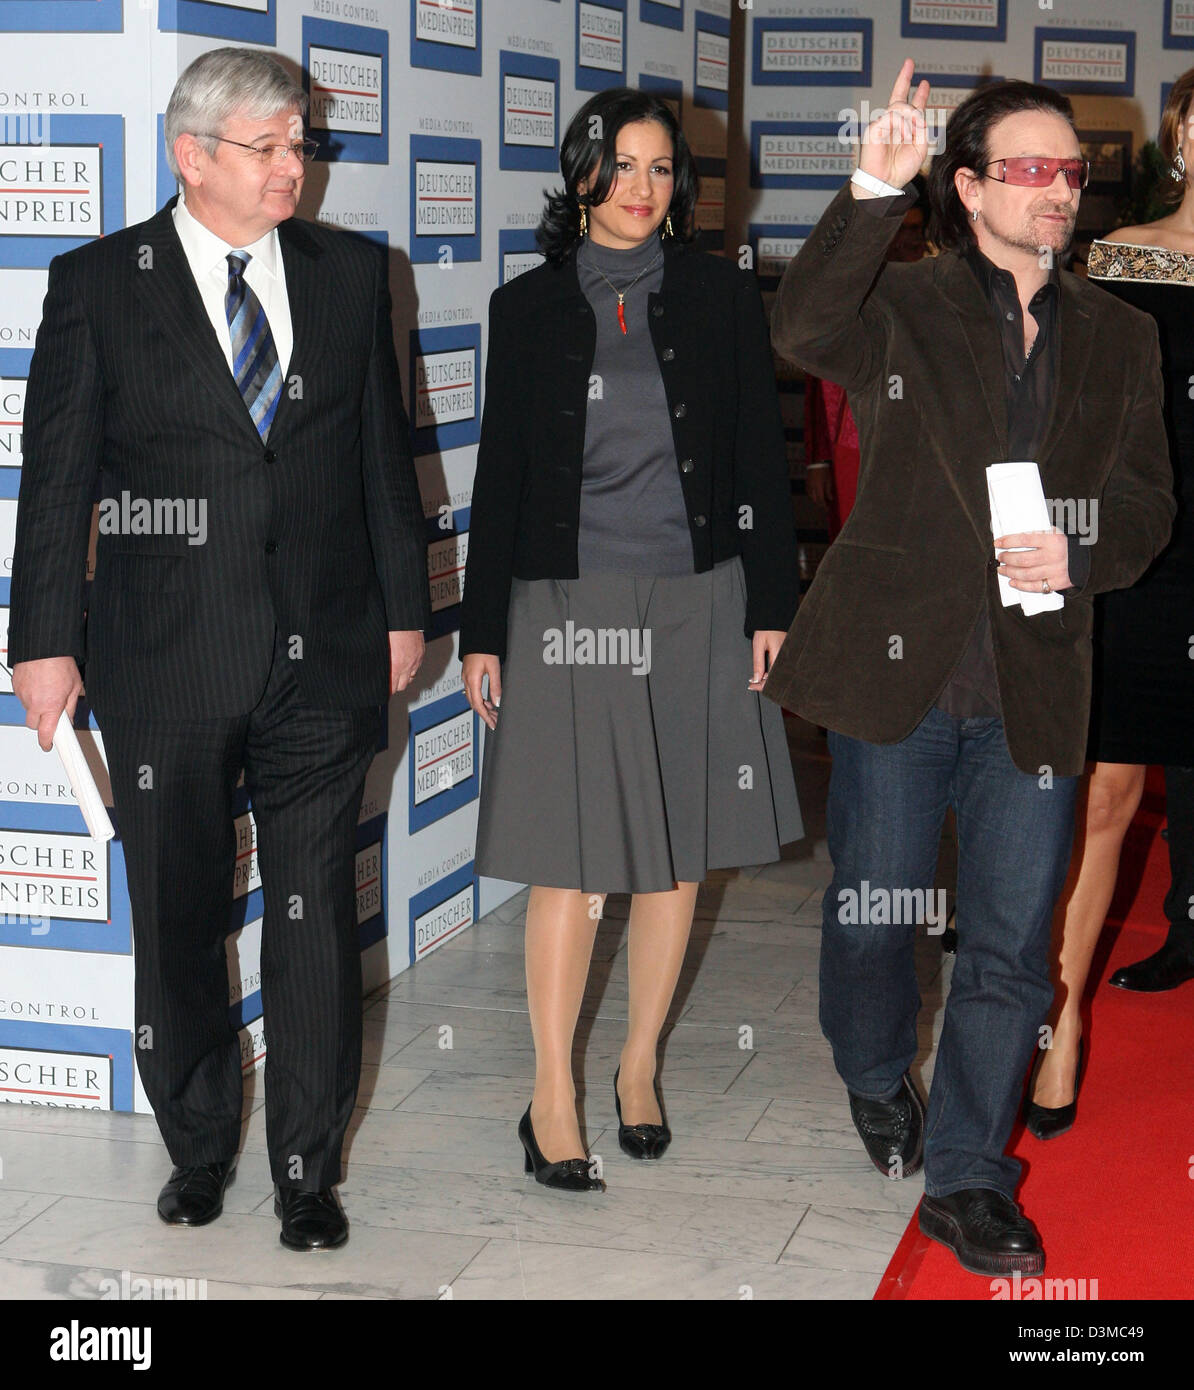 Former German Foreign Minister Joschka Fischer and his wife Minu Barati arrive for the award ceremony of the German Media Prize 2005 to Bono, the lead singer of the Irish rock band U2, at the convention in Baden-Baden, Germany, Tuesday, 24 January 2006. Fischer held the honourific speech in honour of Bono, the lead singer of the Irish rock band U2, who was awarded with the German M Stock Photo